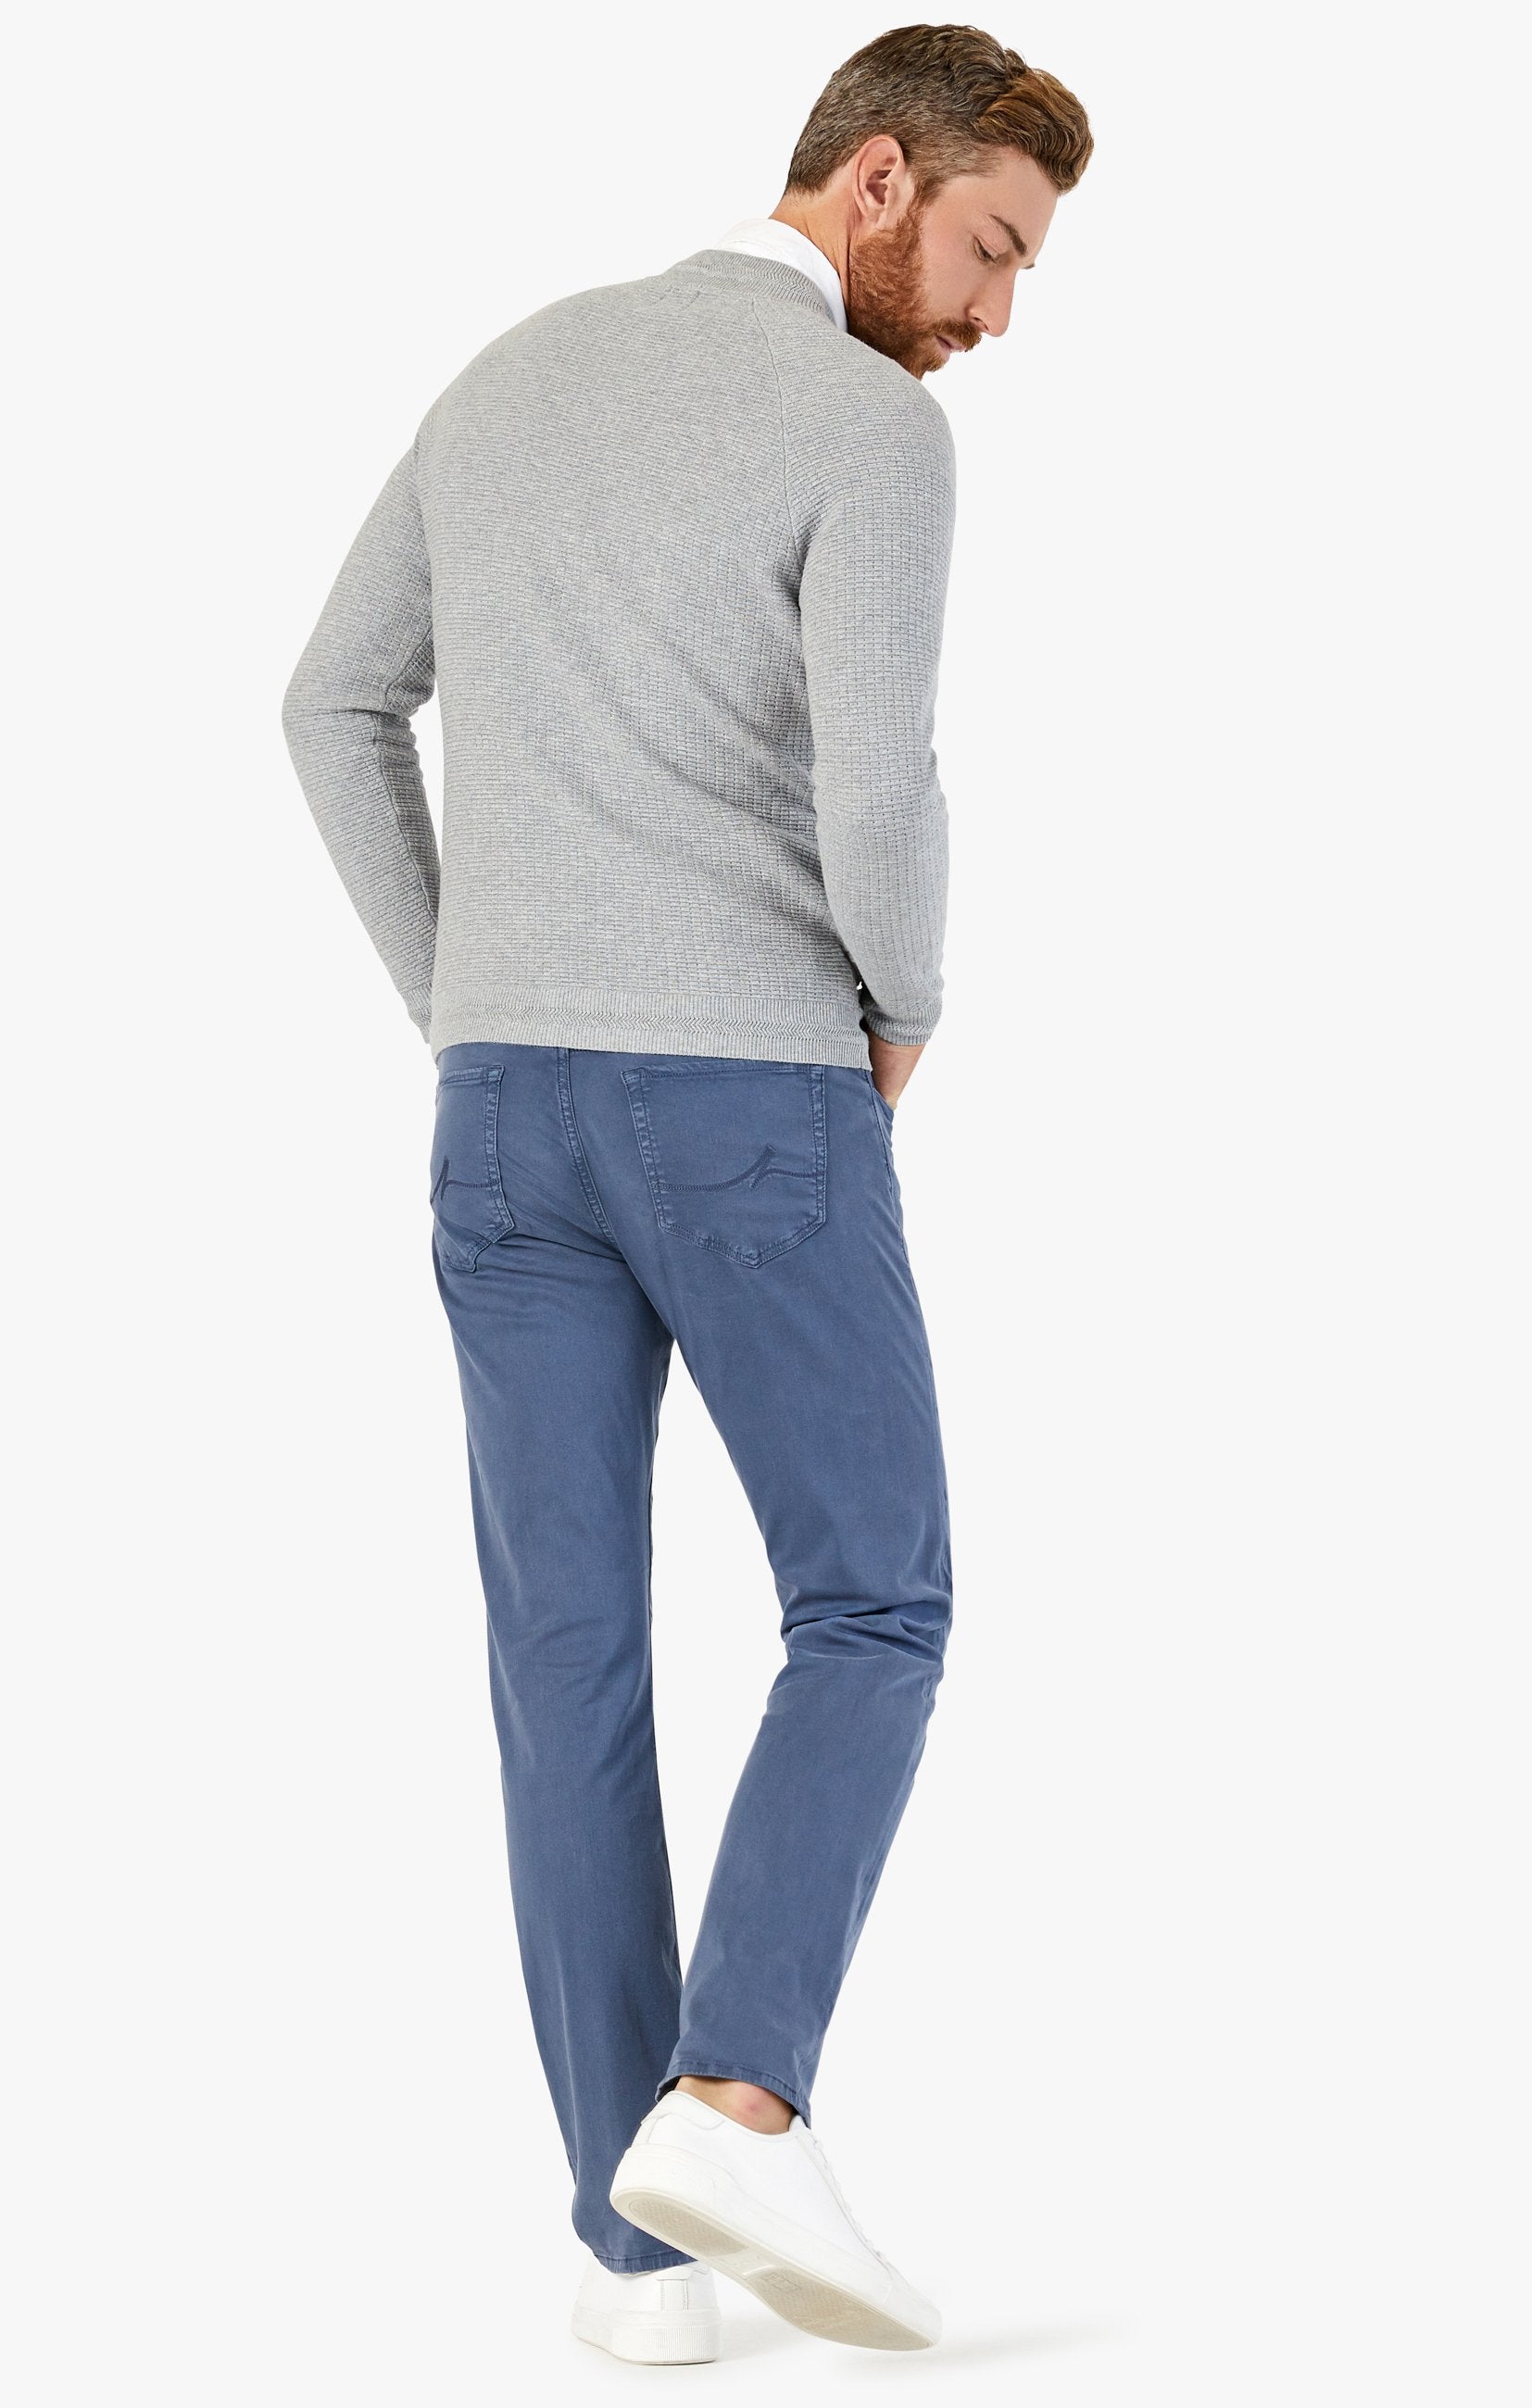 Charisma Relaxed Straight Pants In Vintage Indigo Twill Image 3